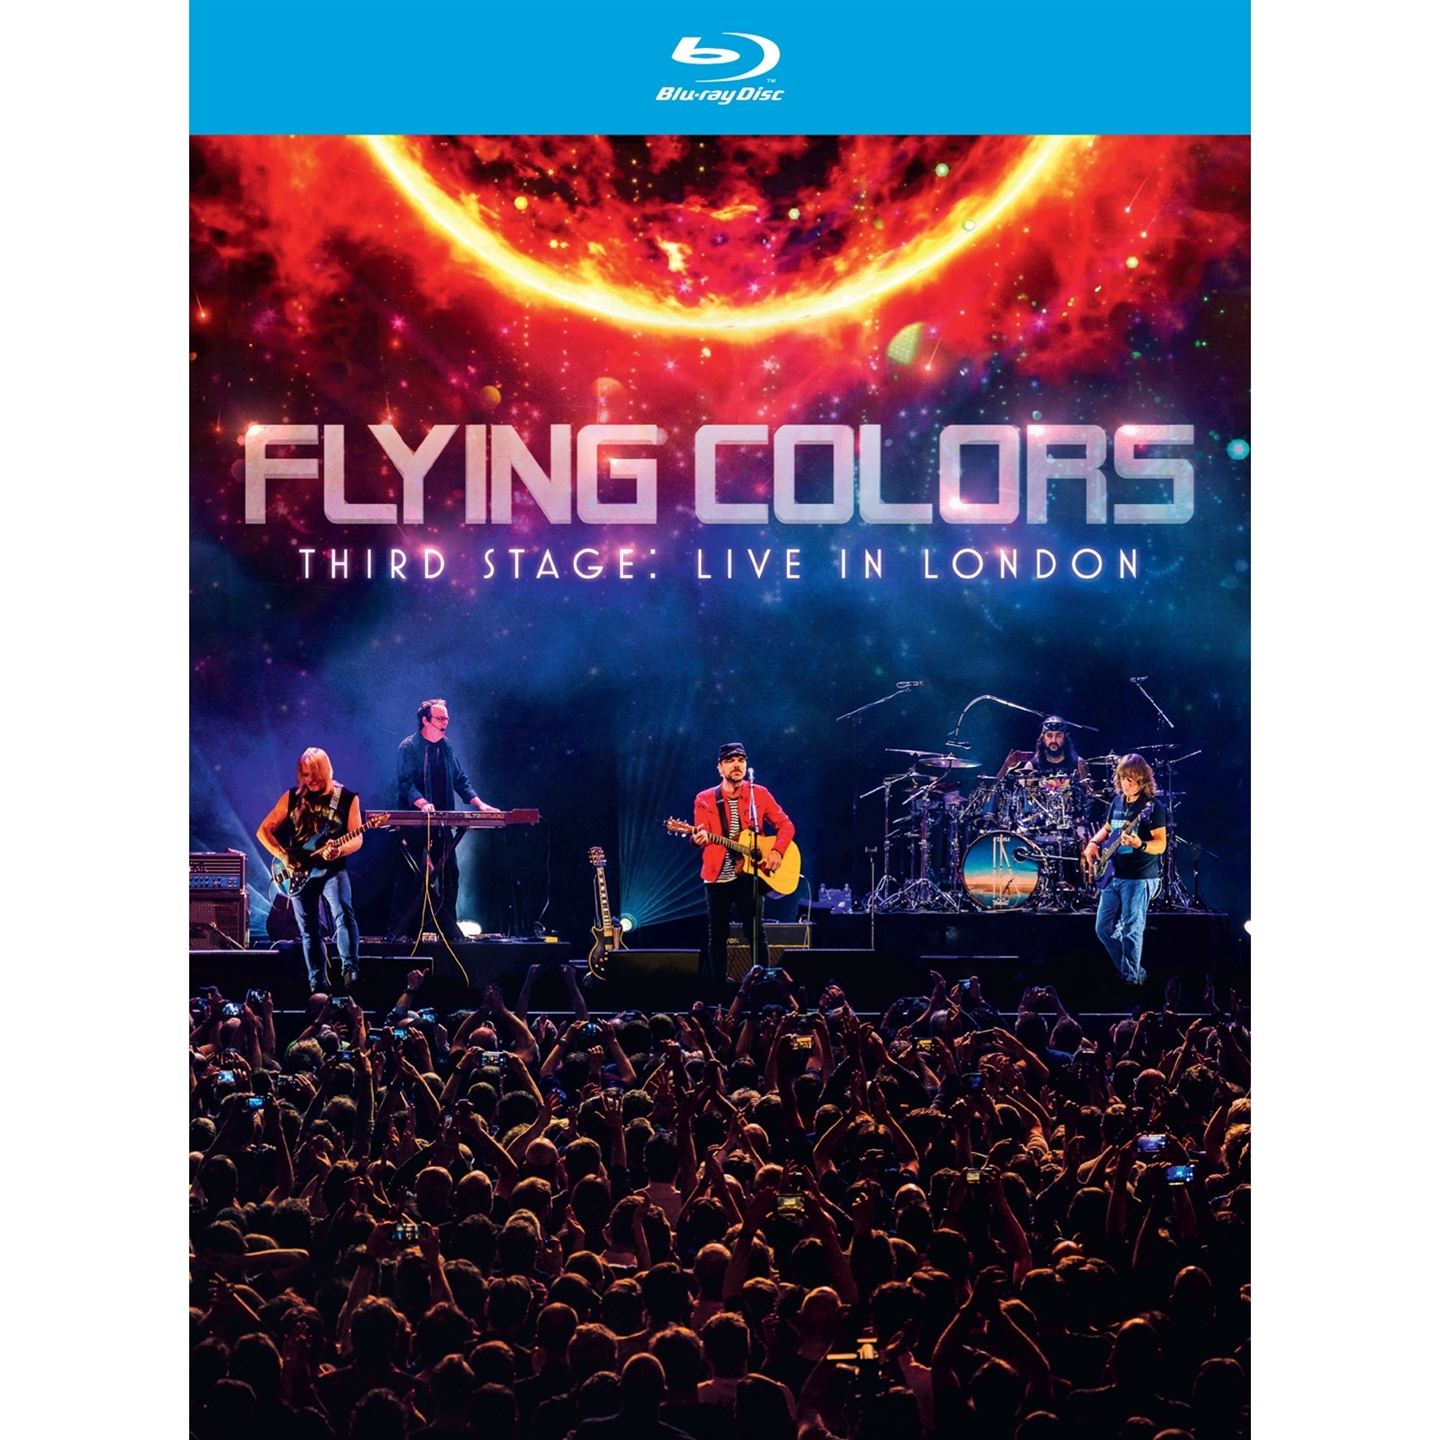 THIRD STAGE: LIVE IN LONDON [BLURAY]